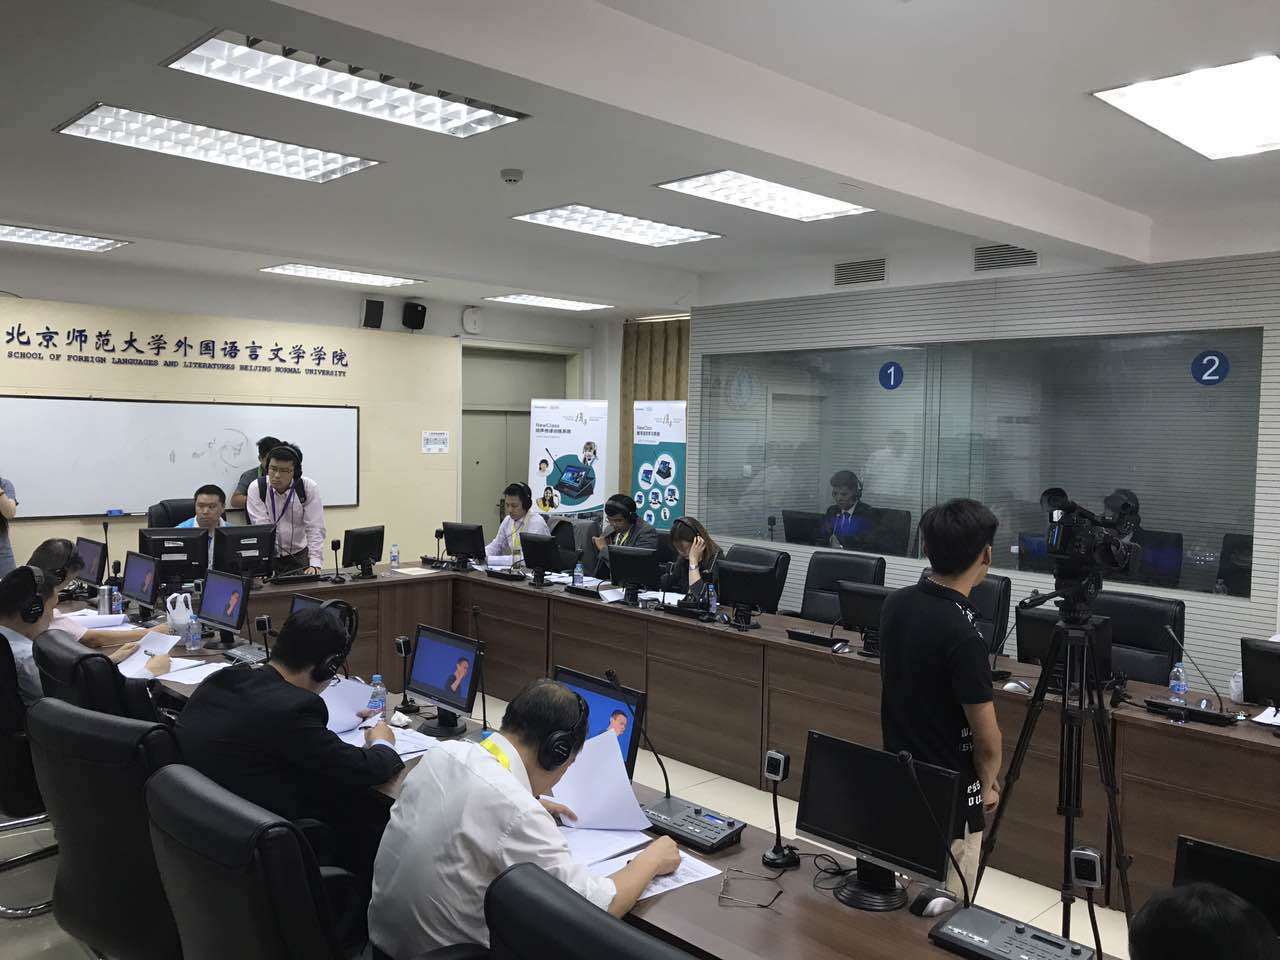 The NewClass simultaneous interpreting training system completed the record of the final of Simultaneous Interpreting Contest of the 6th National Interpreting Competition